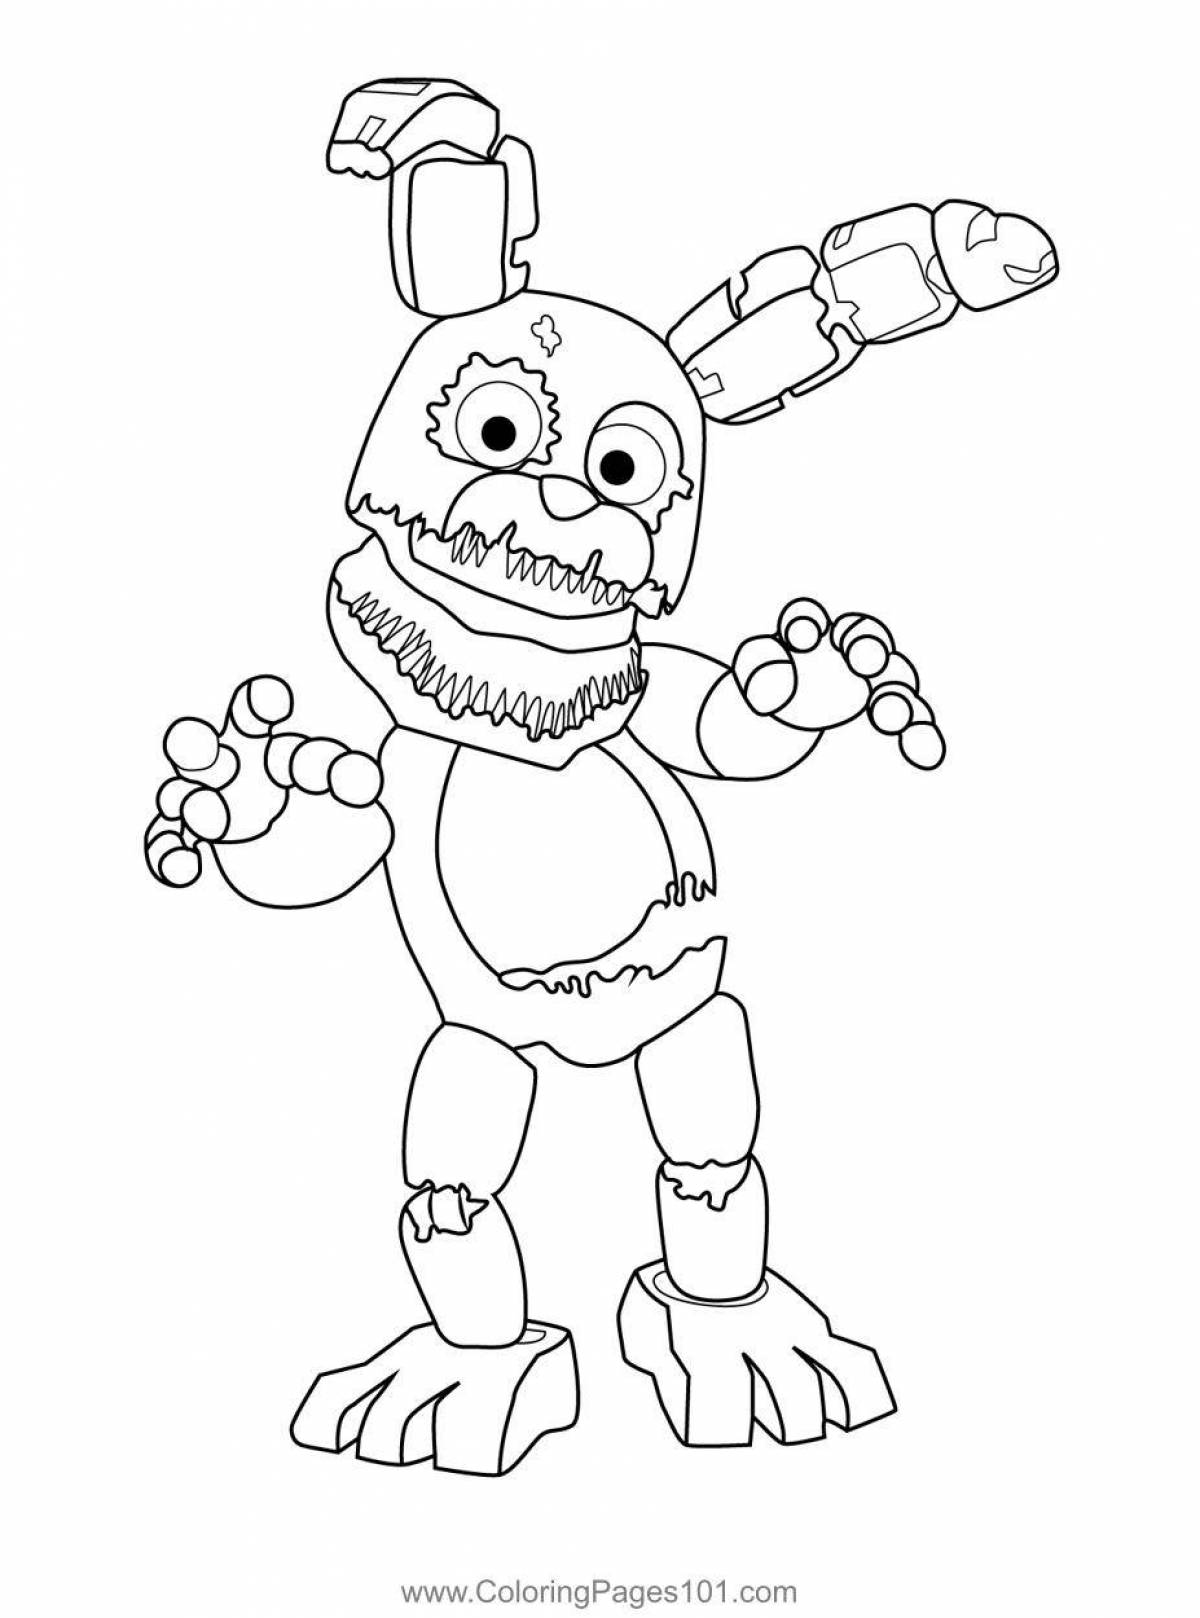 Adorable left-handed animatronic coloring book